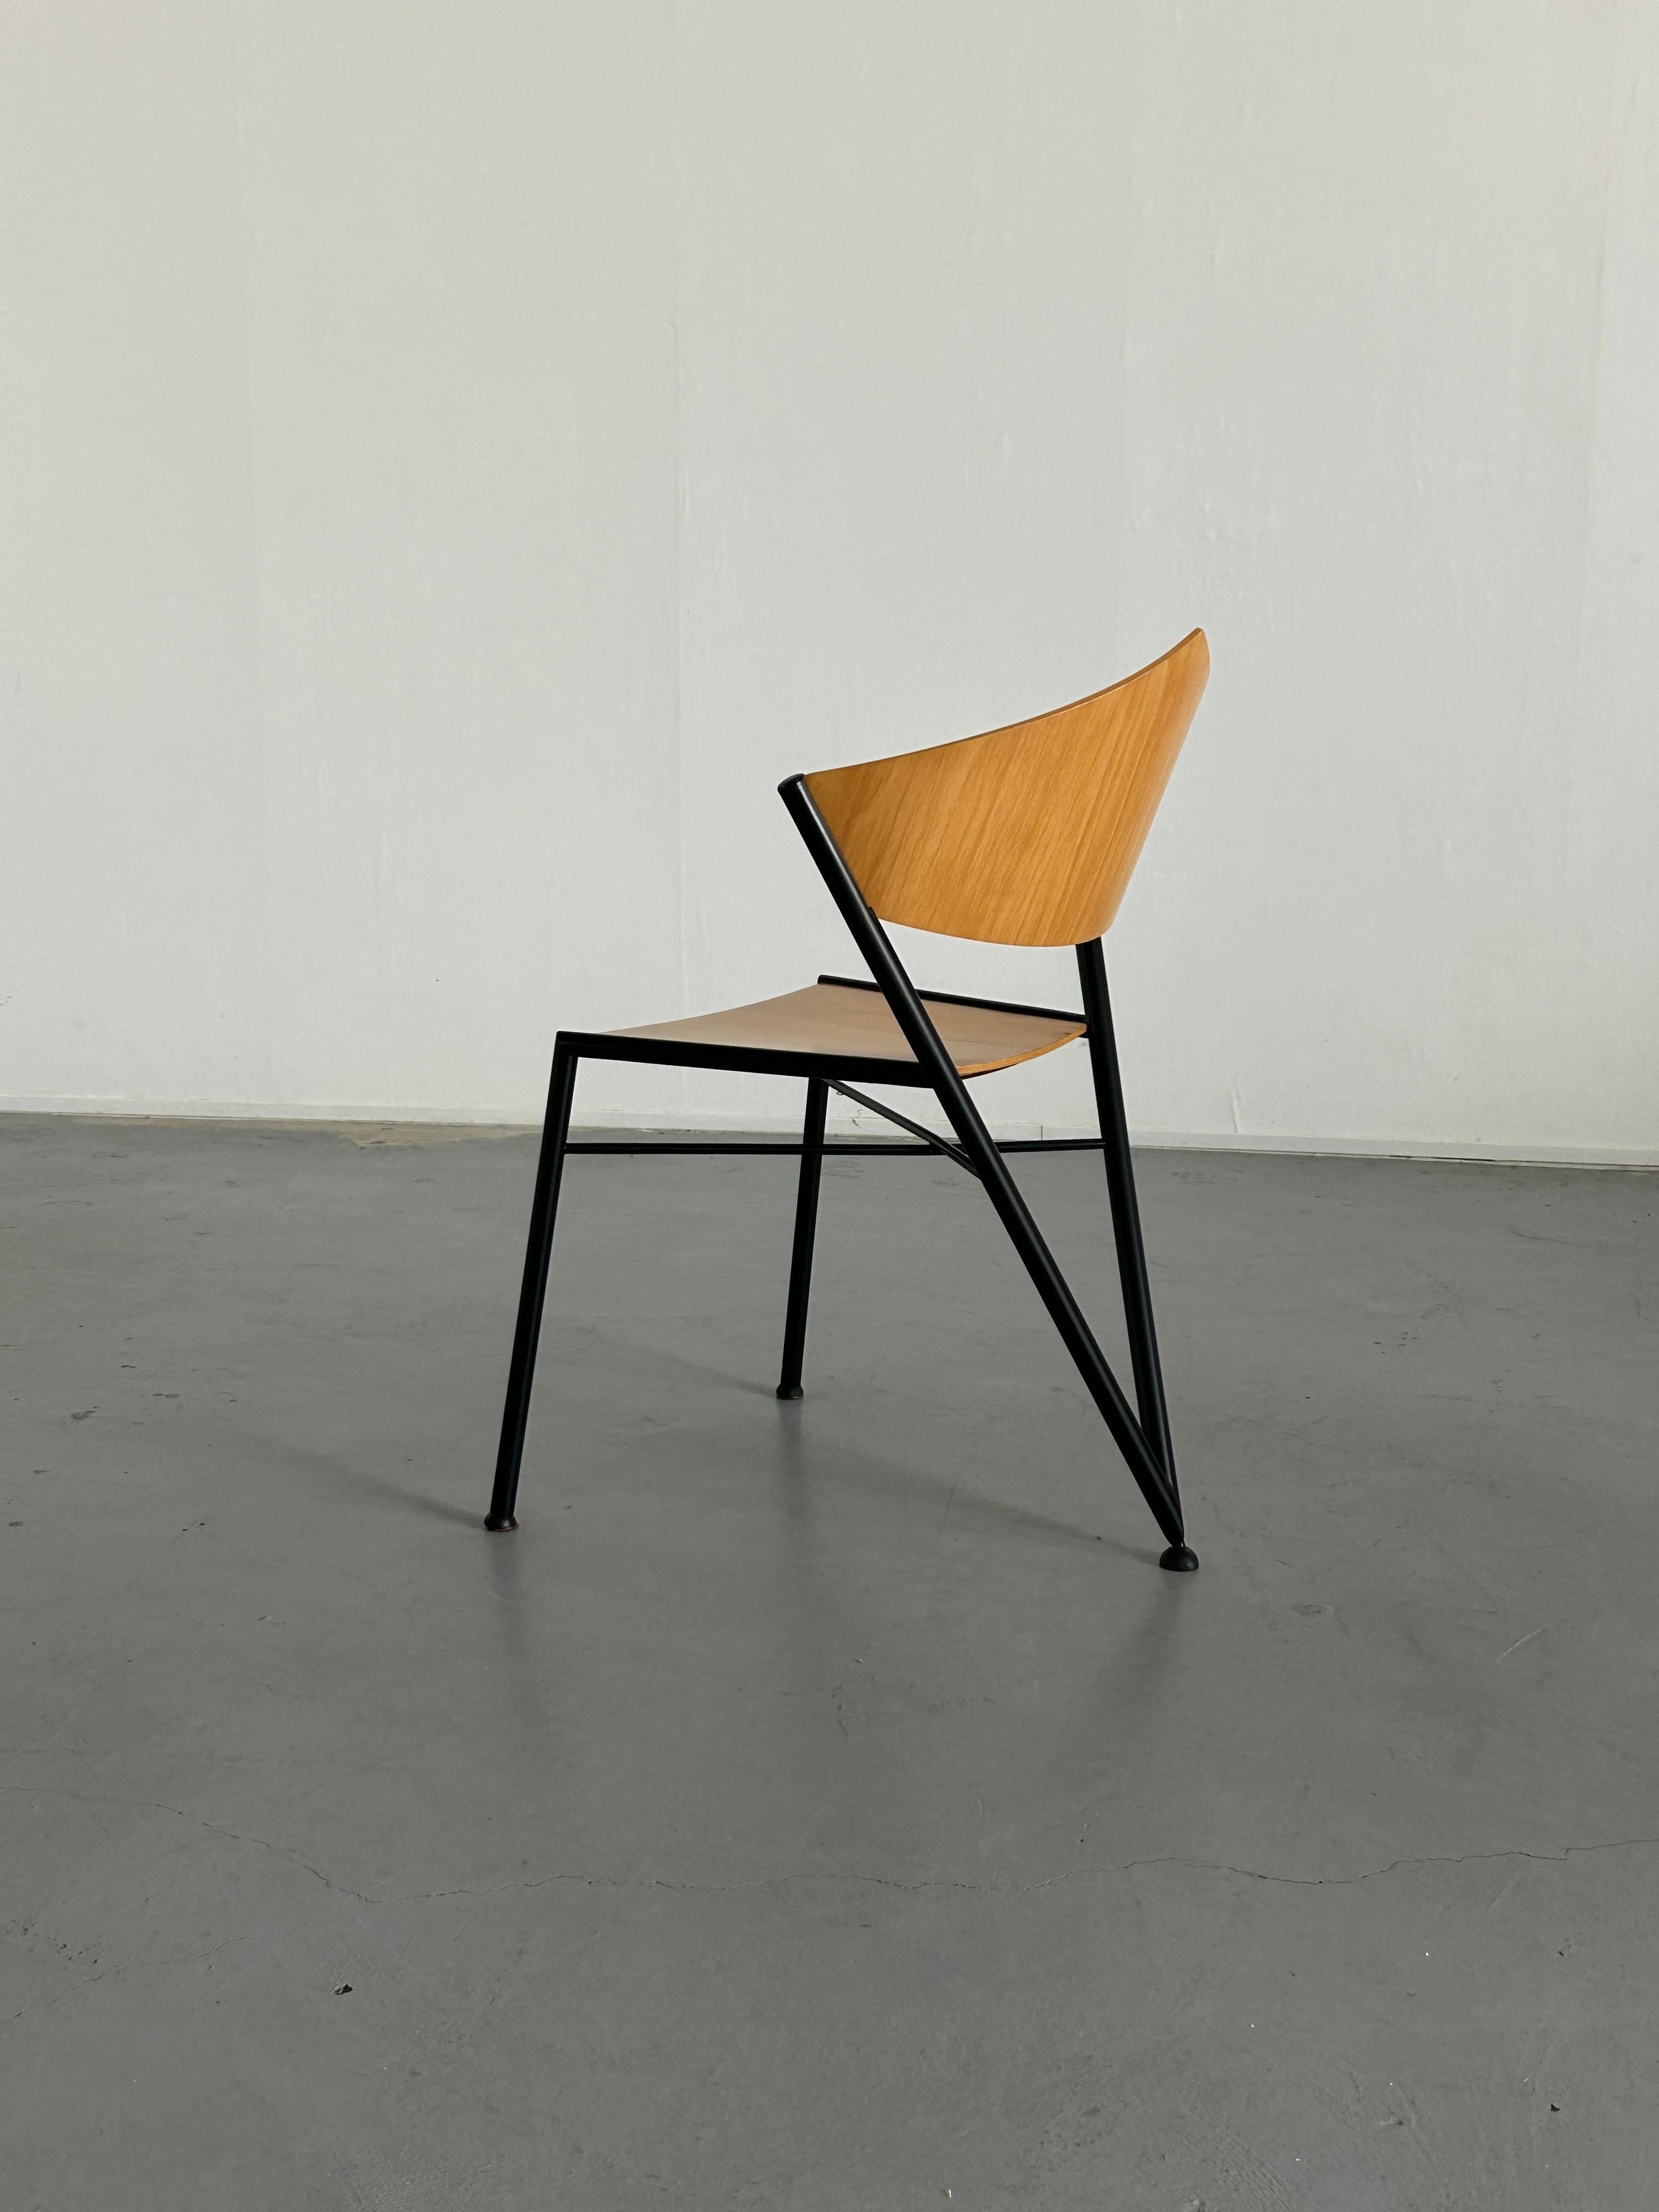 1 of 6 Postmodern Metal Framed Plywood Chairs, Memphis Design, 1980s Italy 6